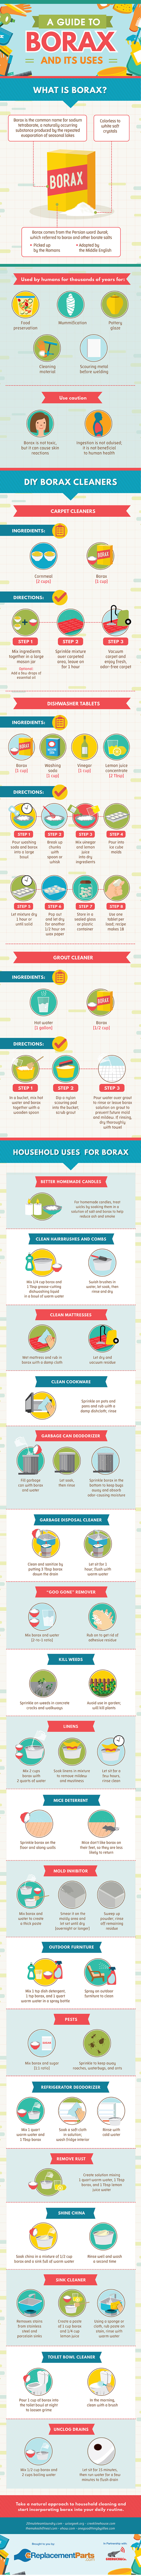 21 Amazing Ways to Use Borax for a Healthier Home (Infographic)